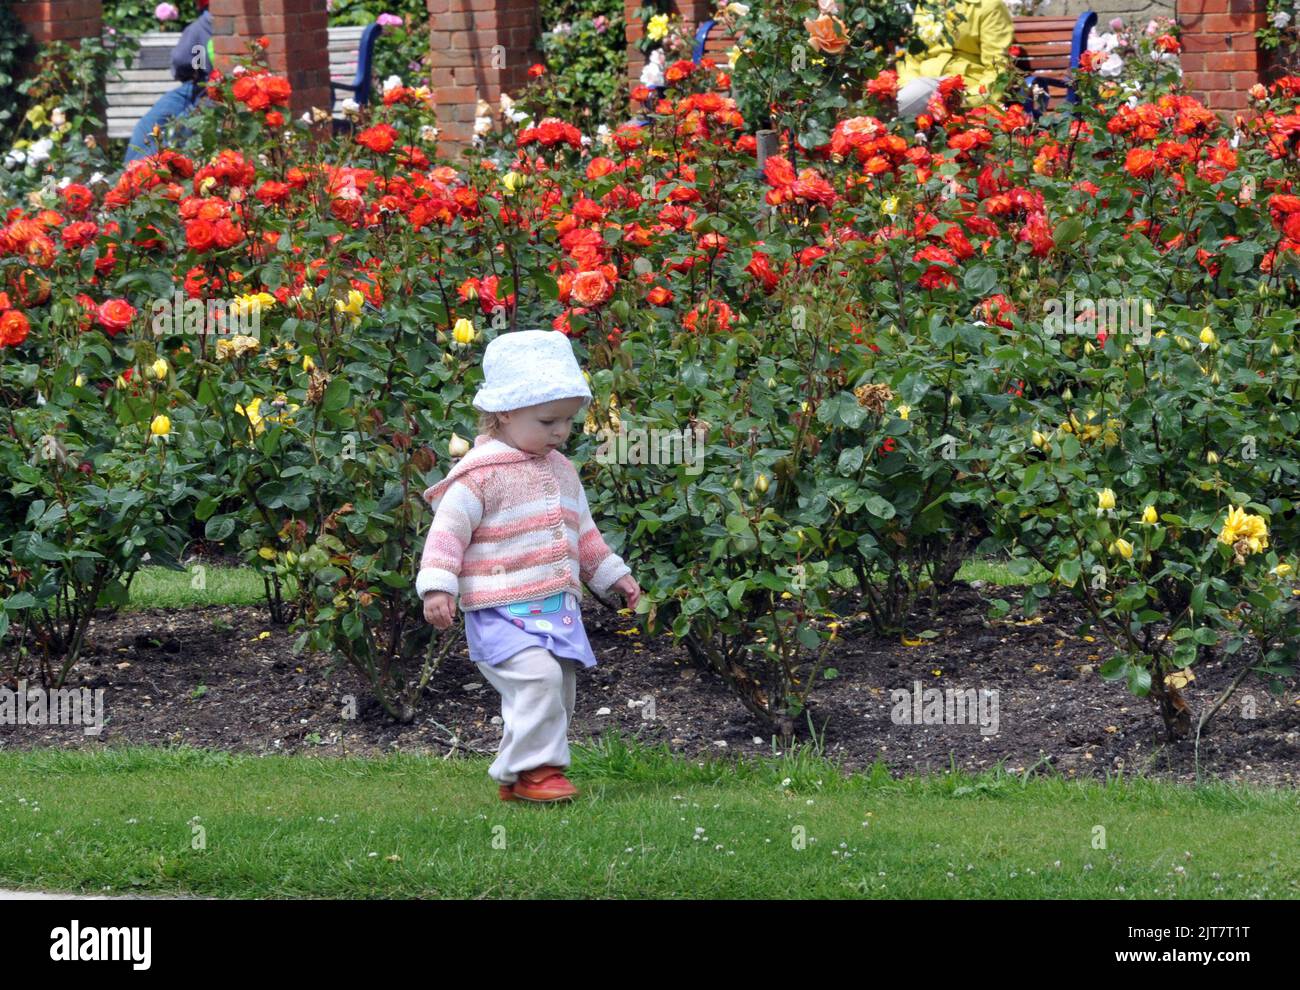 15 MONTH OLD LOUISE OZOLINE MAKES THE MOST OF THE WEATHER TO ENJOY A STROLL AMONGST THE ROSES AT THE ROSE GARDEN AT SOUTHSEA, HANTS. PIC MIKE WALKER, MIKE WALKER PICTURES, 2012 Stock Photo